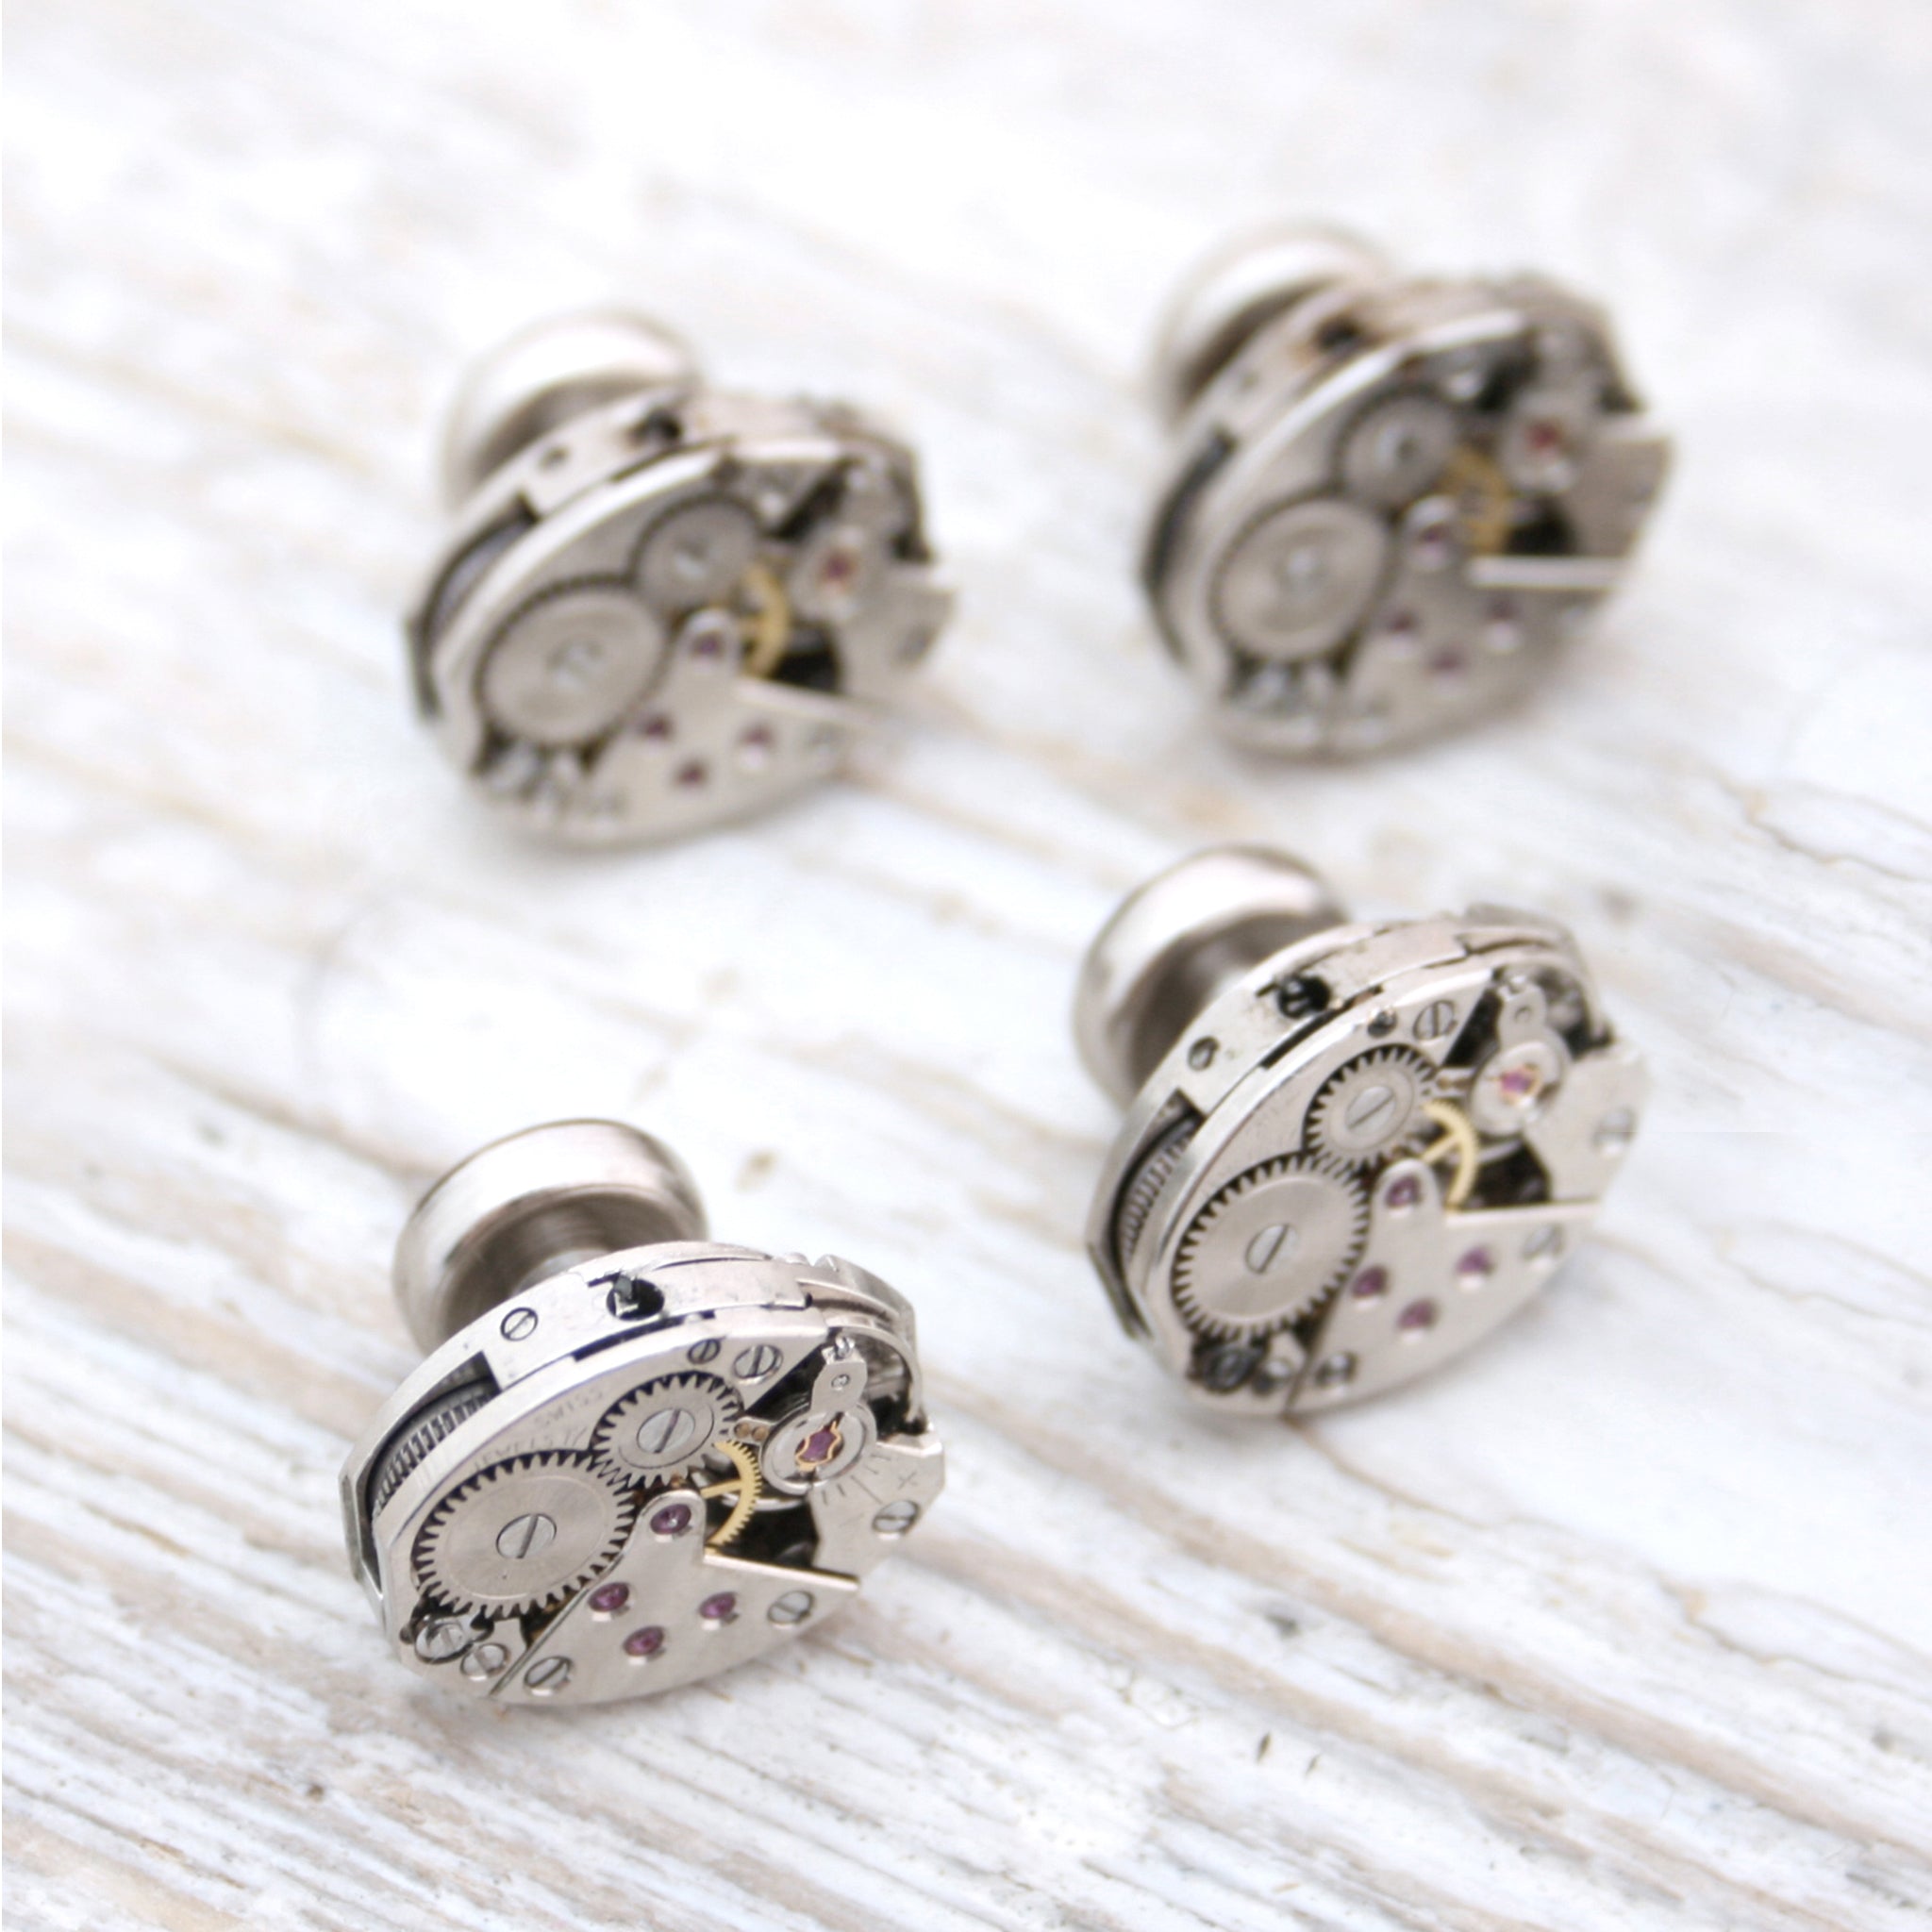 Set of four tuxedo studs made of real watch mechanisms